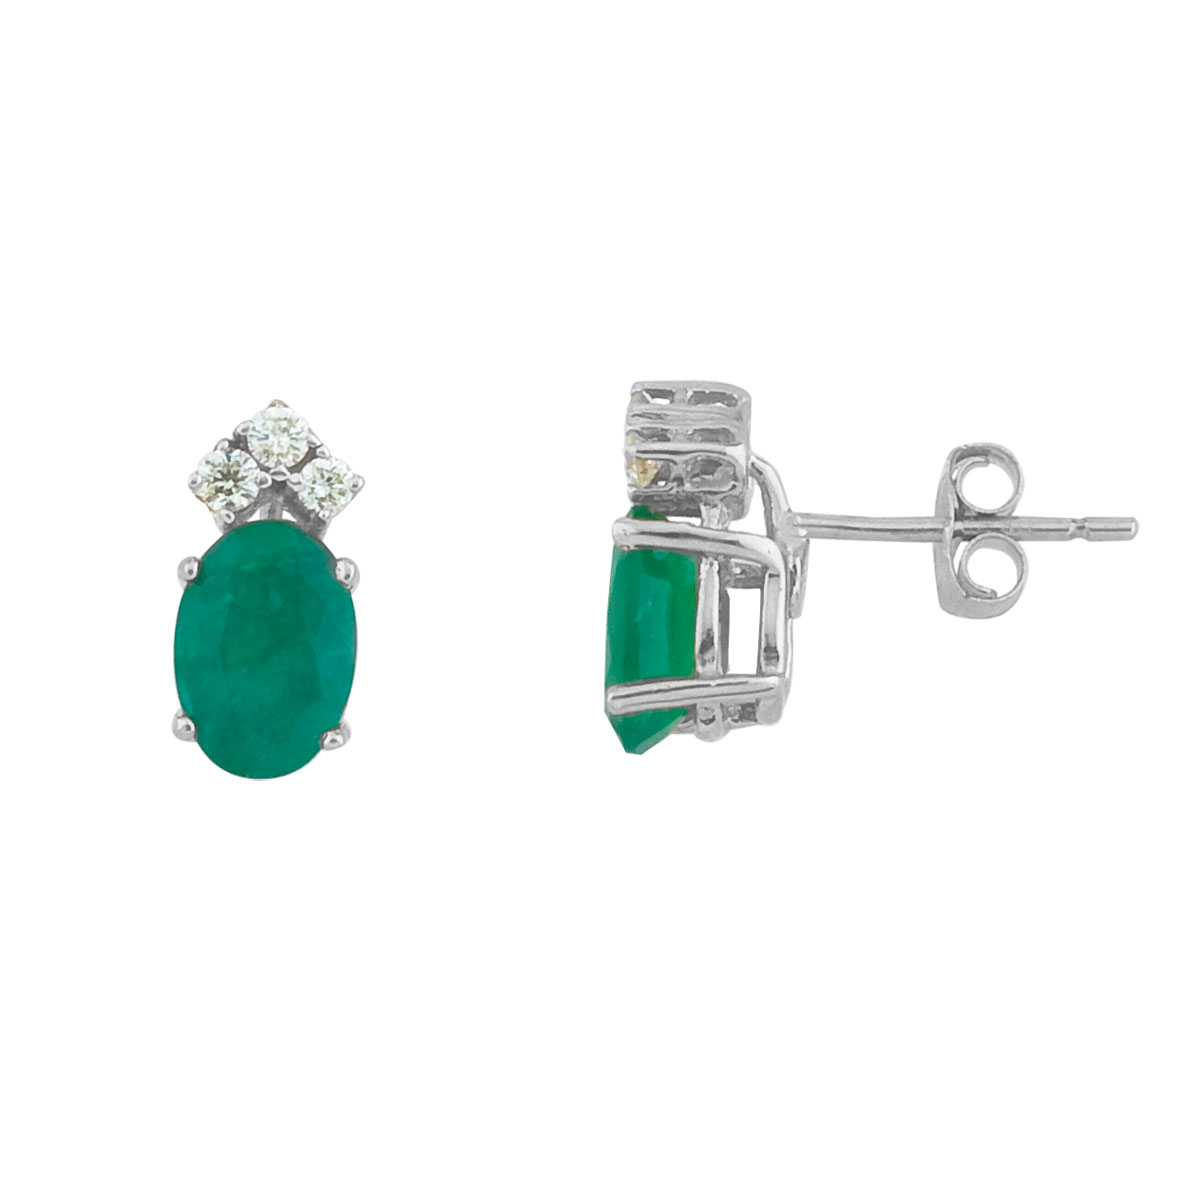 JCX2247: These 7x5 mm oval shaped emerald earrings are set in beautiful 14k white  gold and feature .12 total carat diamonds.